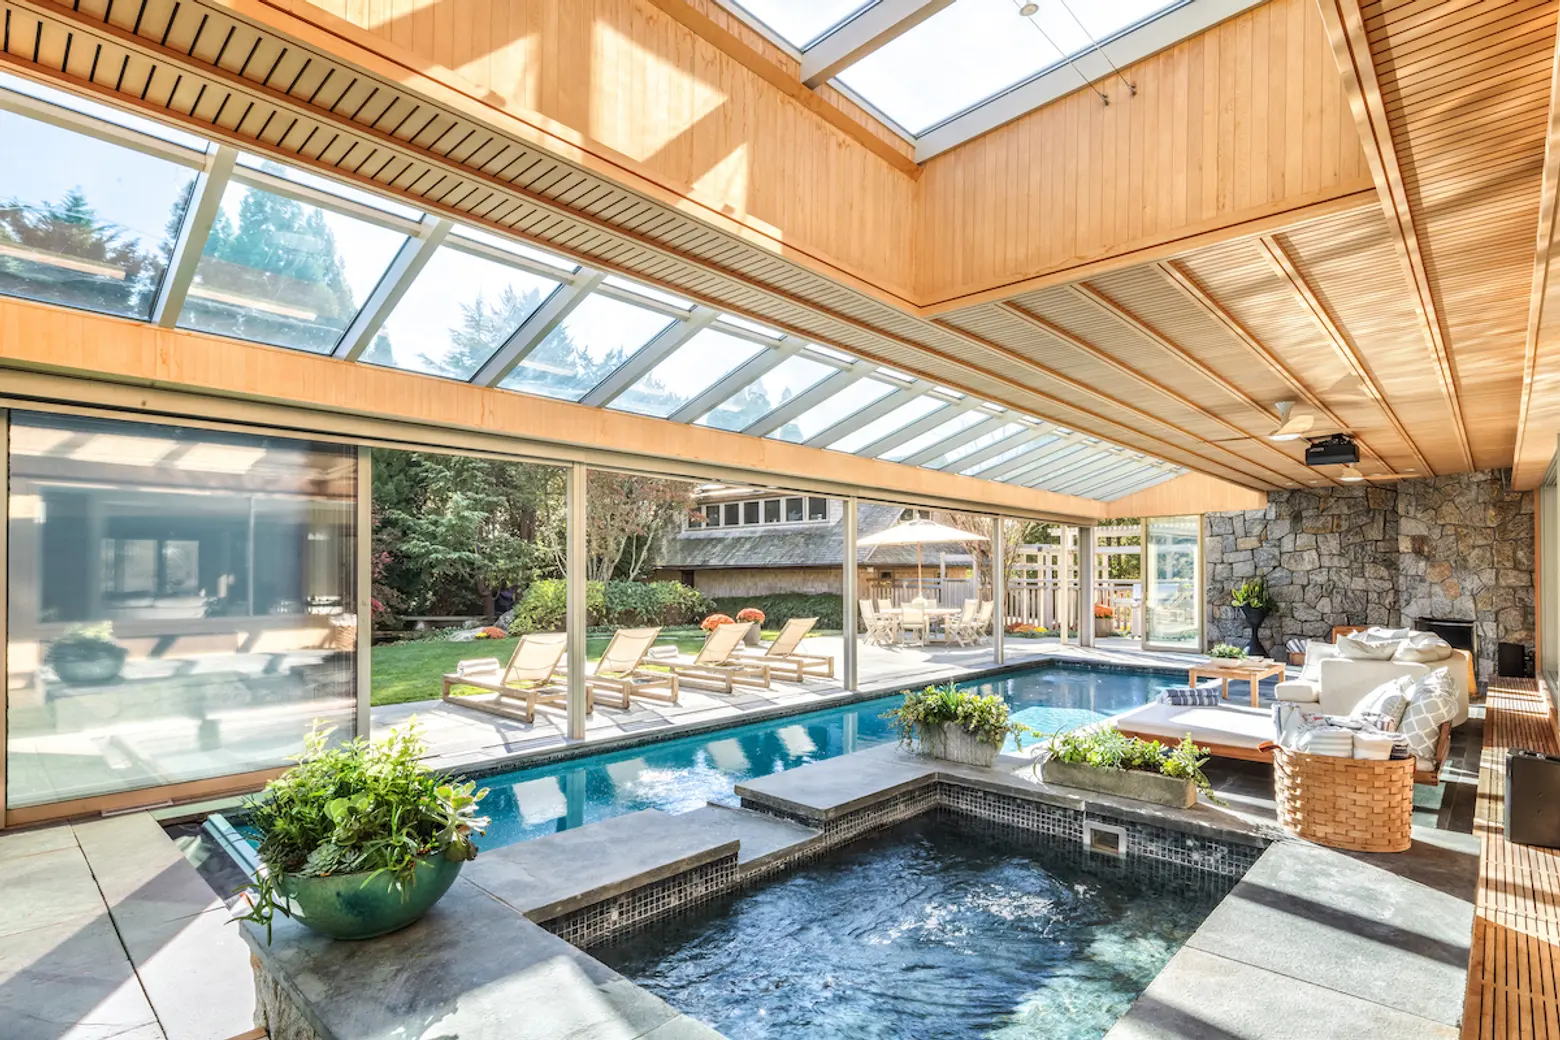 This resort-like $9.5M Hamptons home has an indoor/outdoor pool off the kitchen